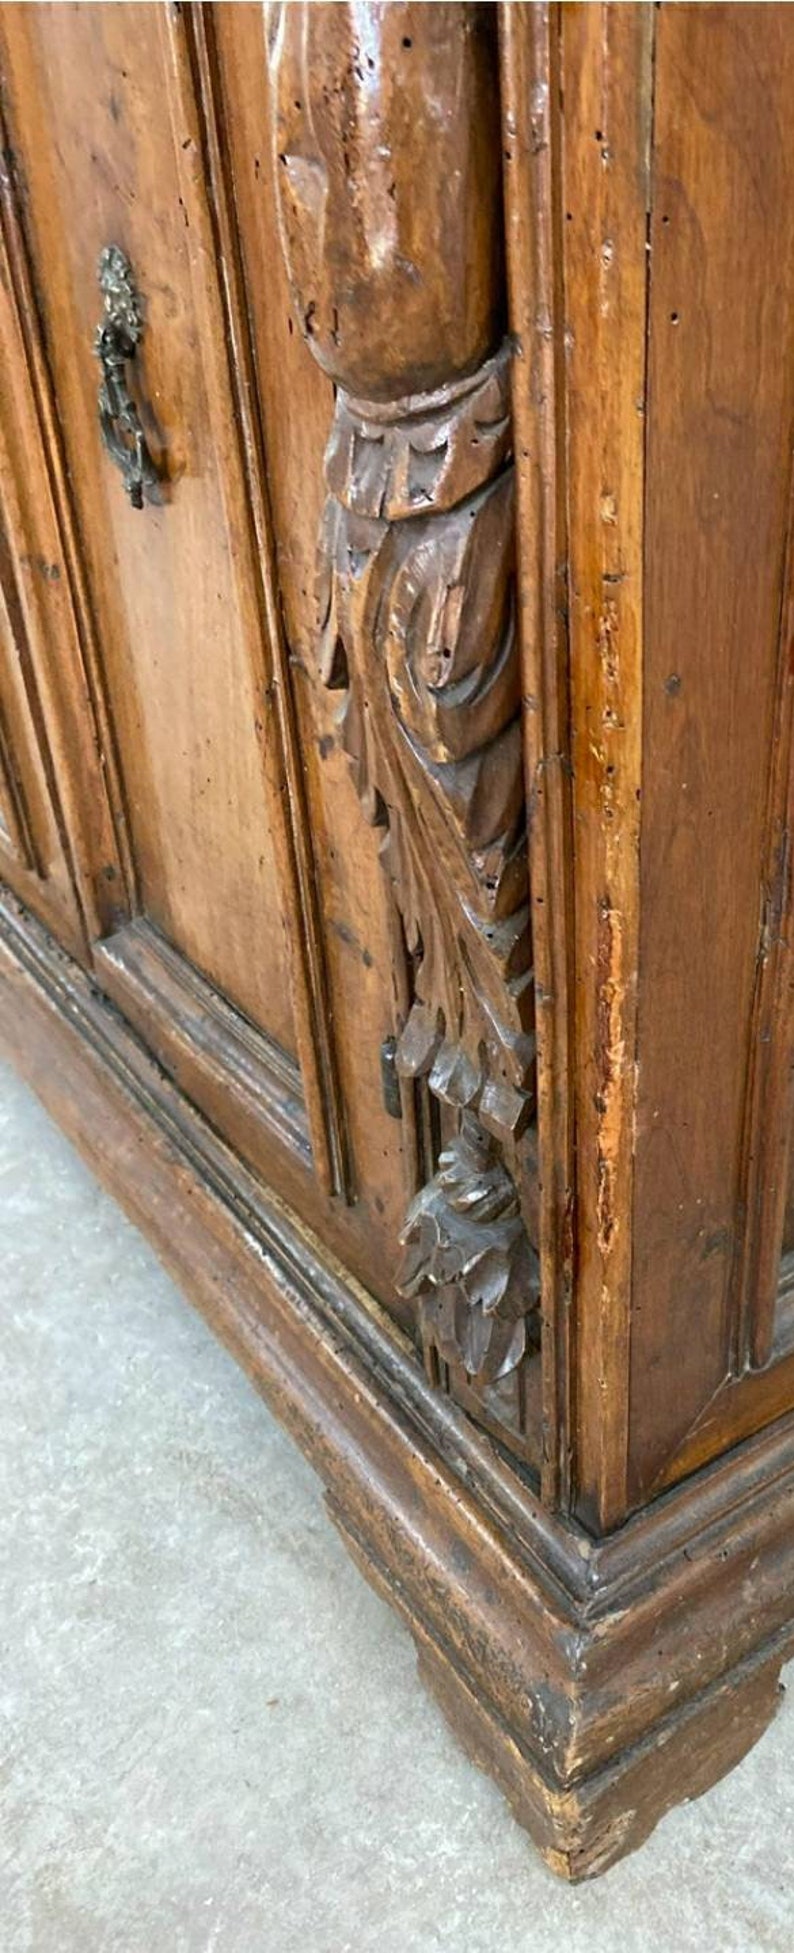 18th Century Italian Carved Walnut Two Door Cabinet Credenza Antique Sideboard Server image 6